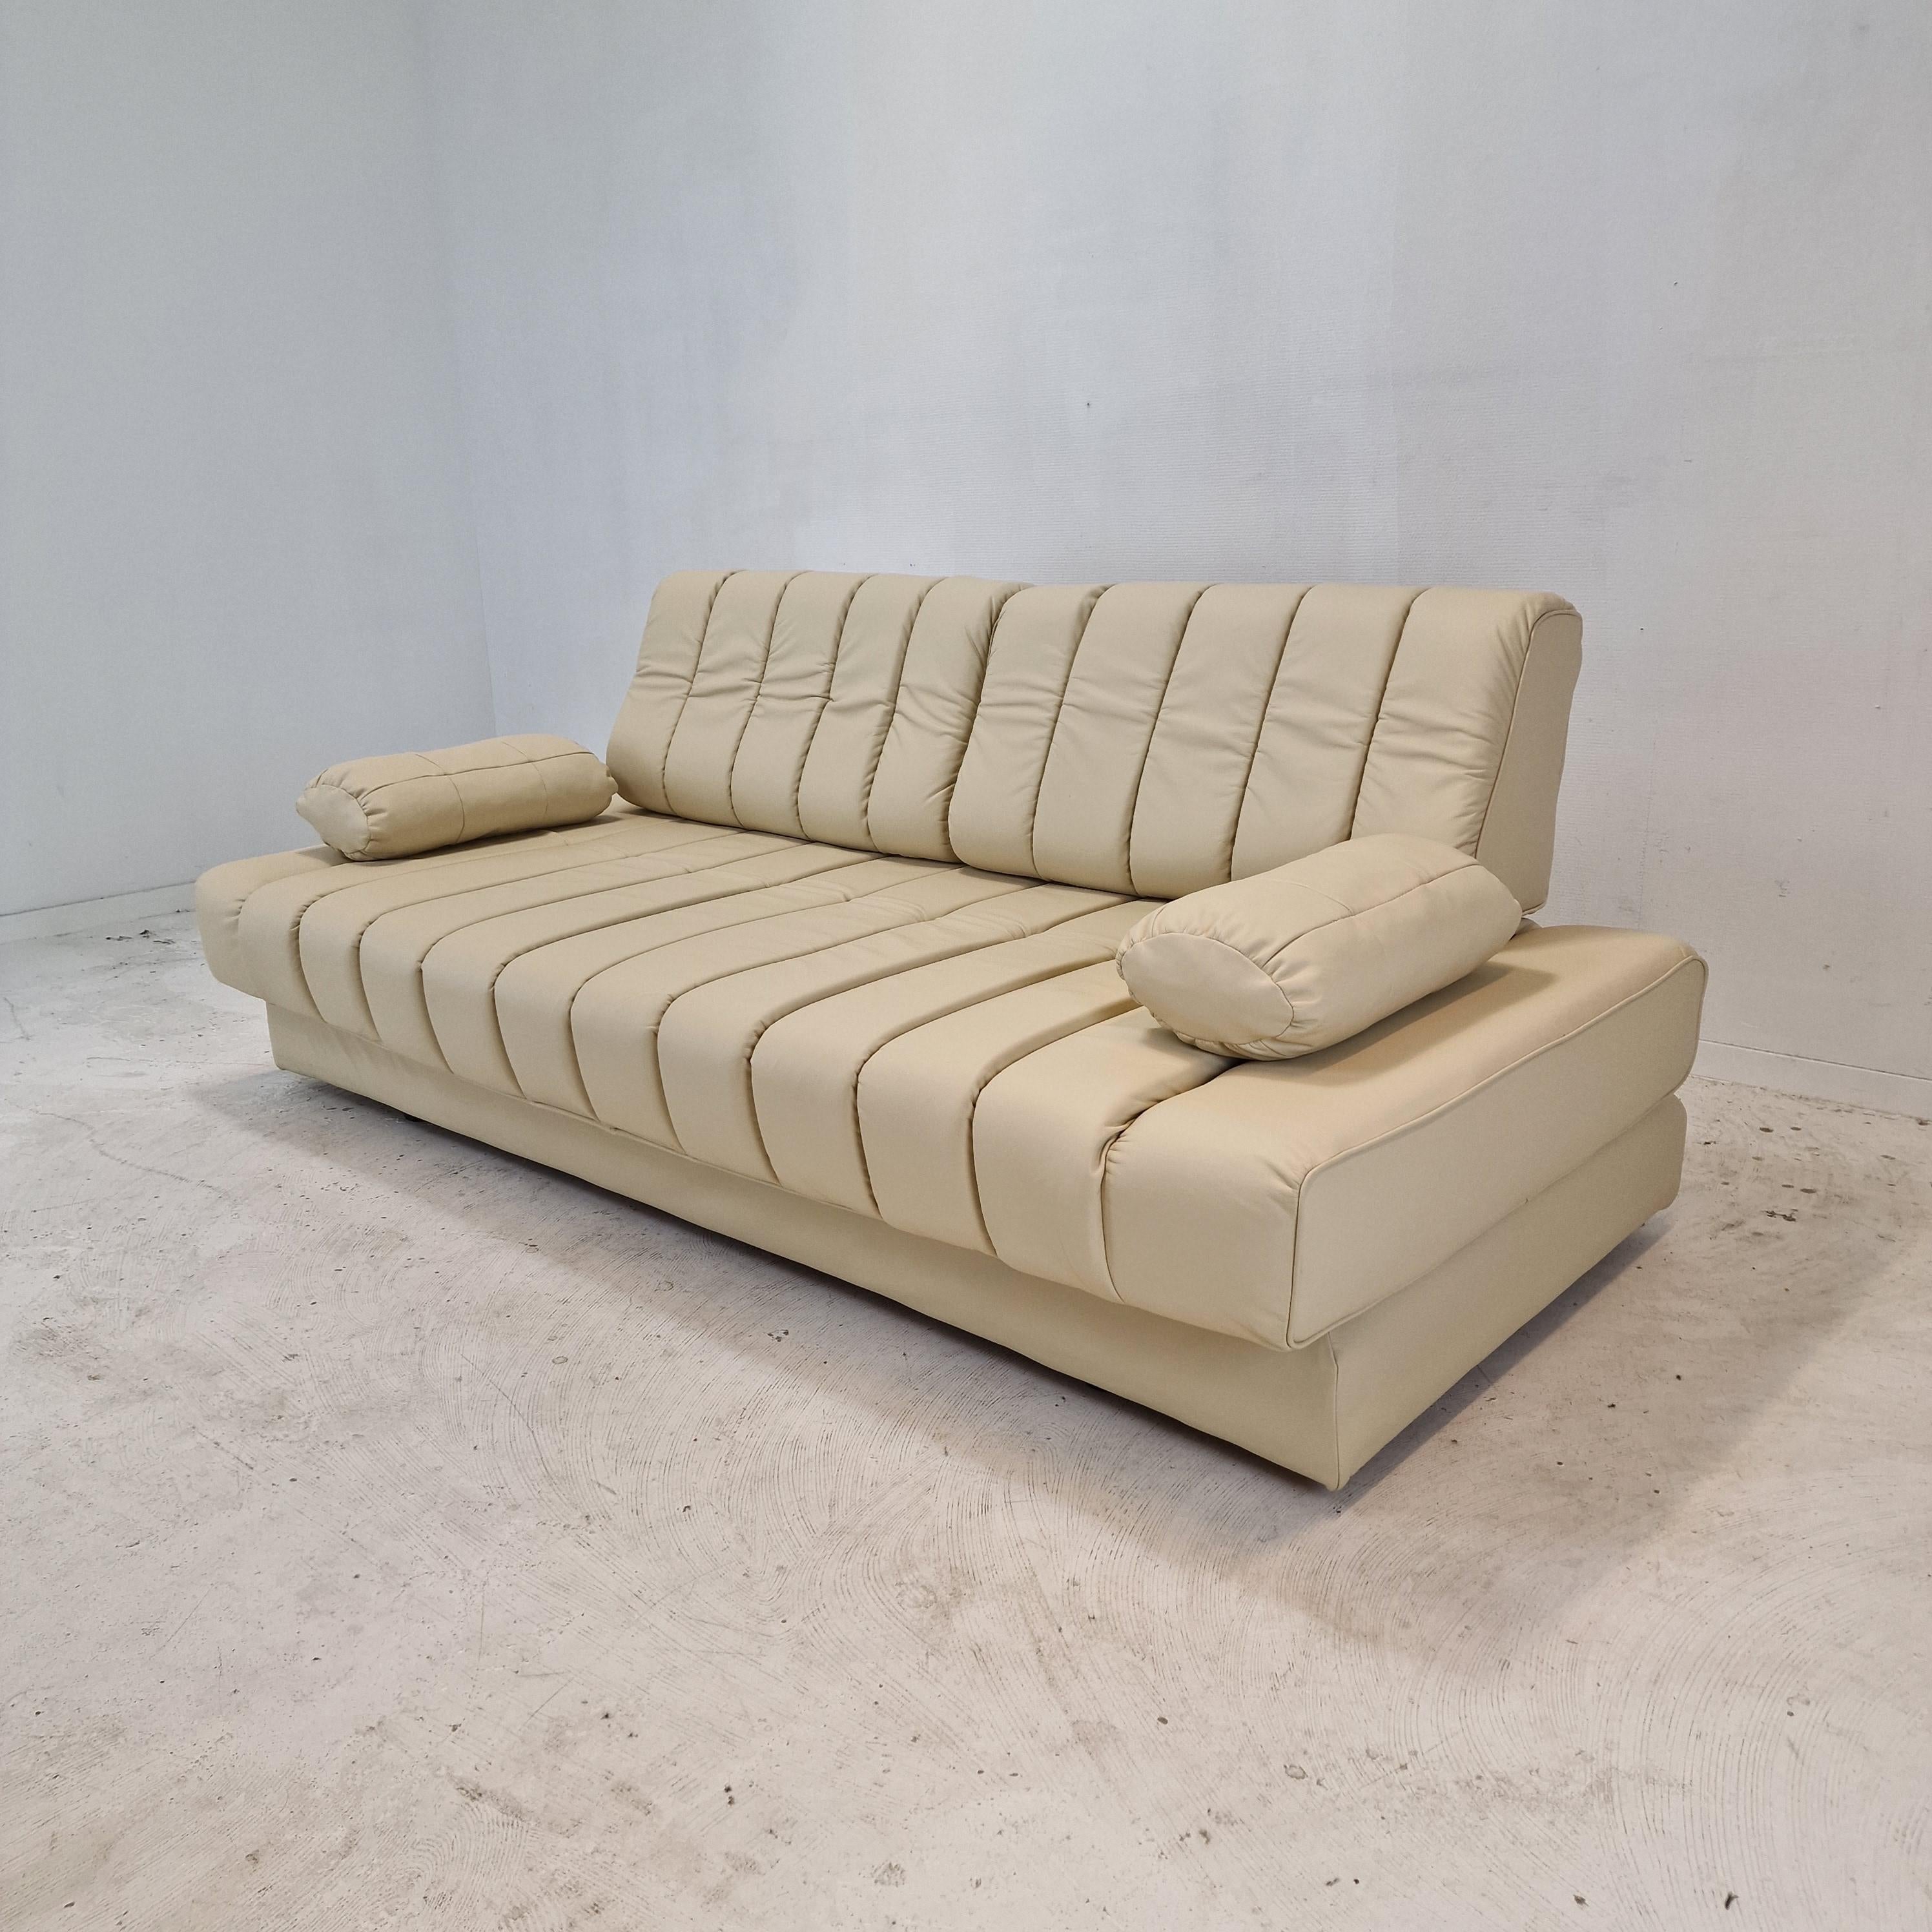 DS-85 Sofa or Daybed by De Sede, Switzerland 1970s For Sale 1